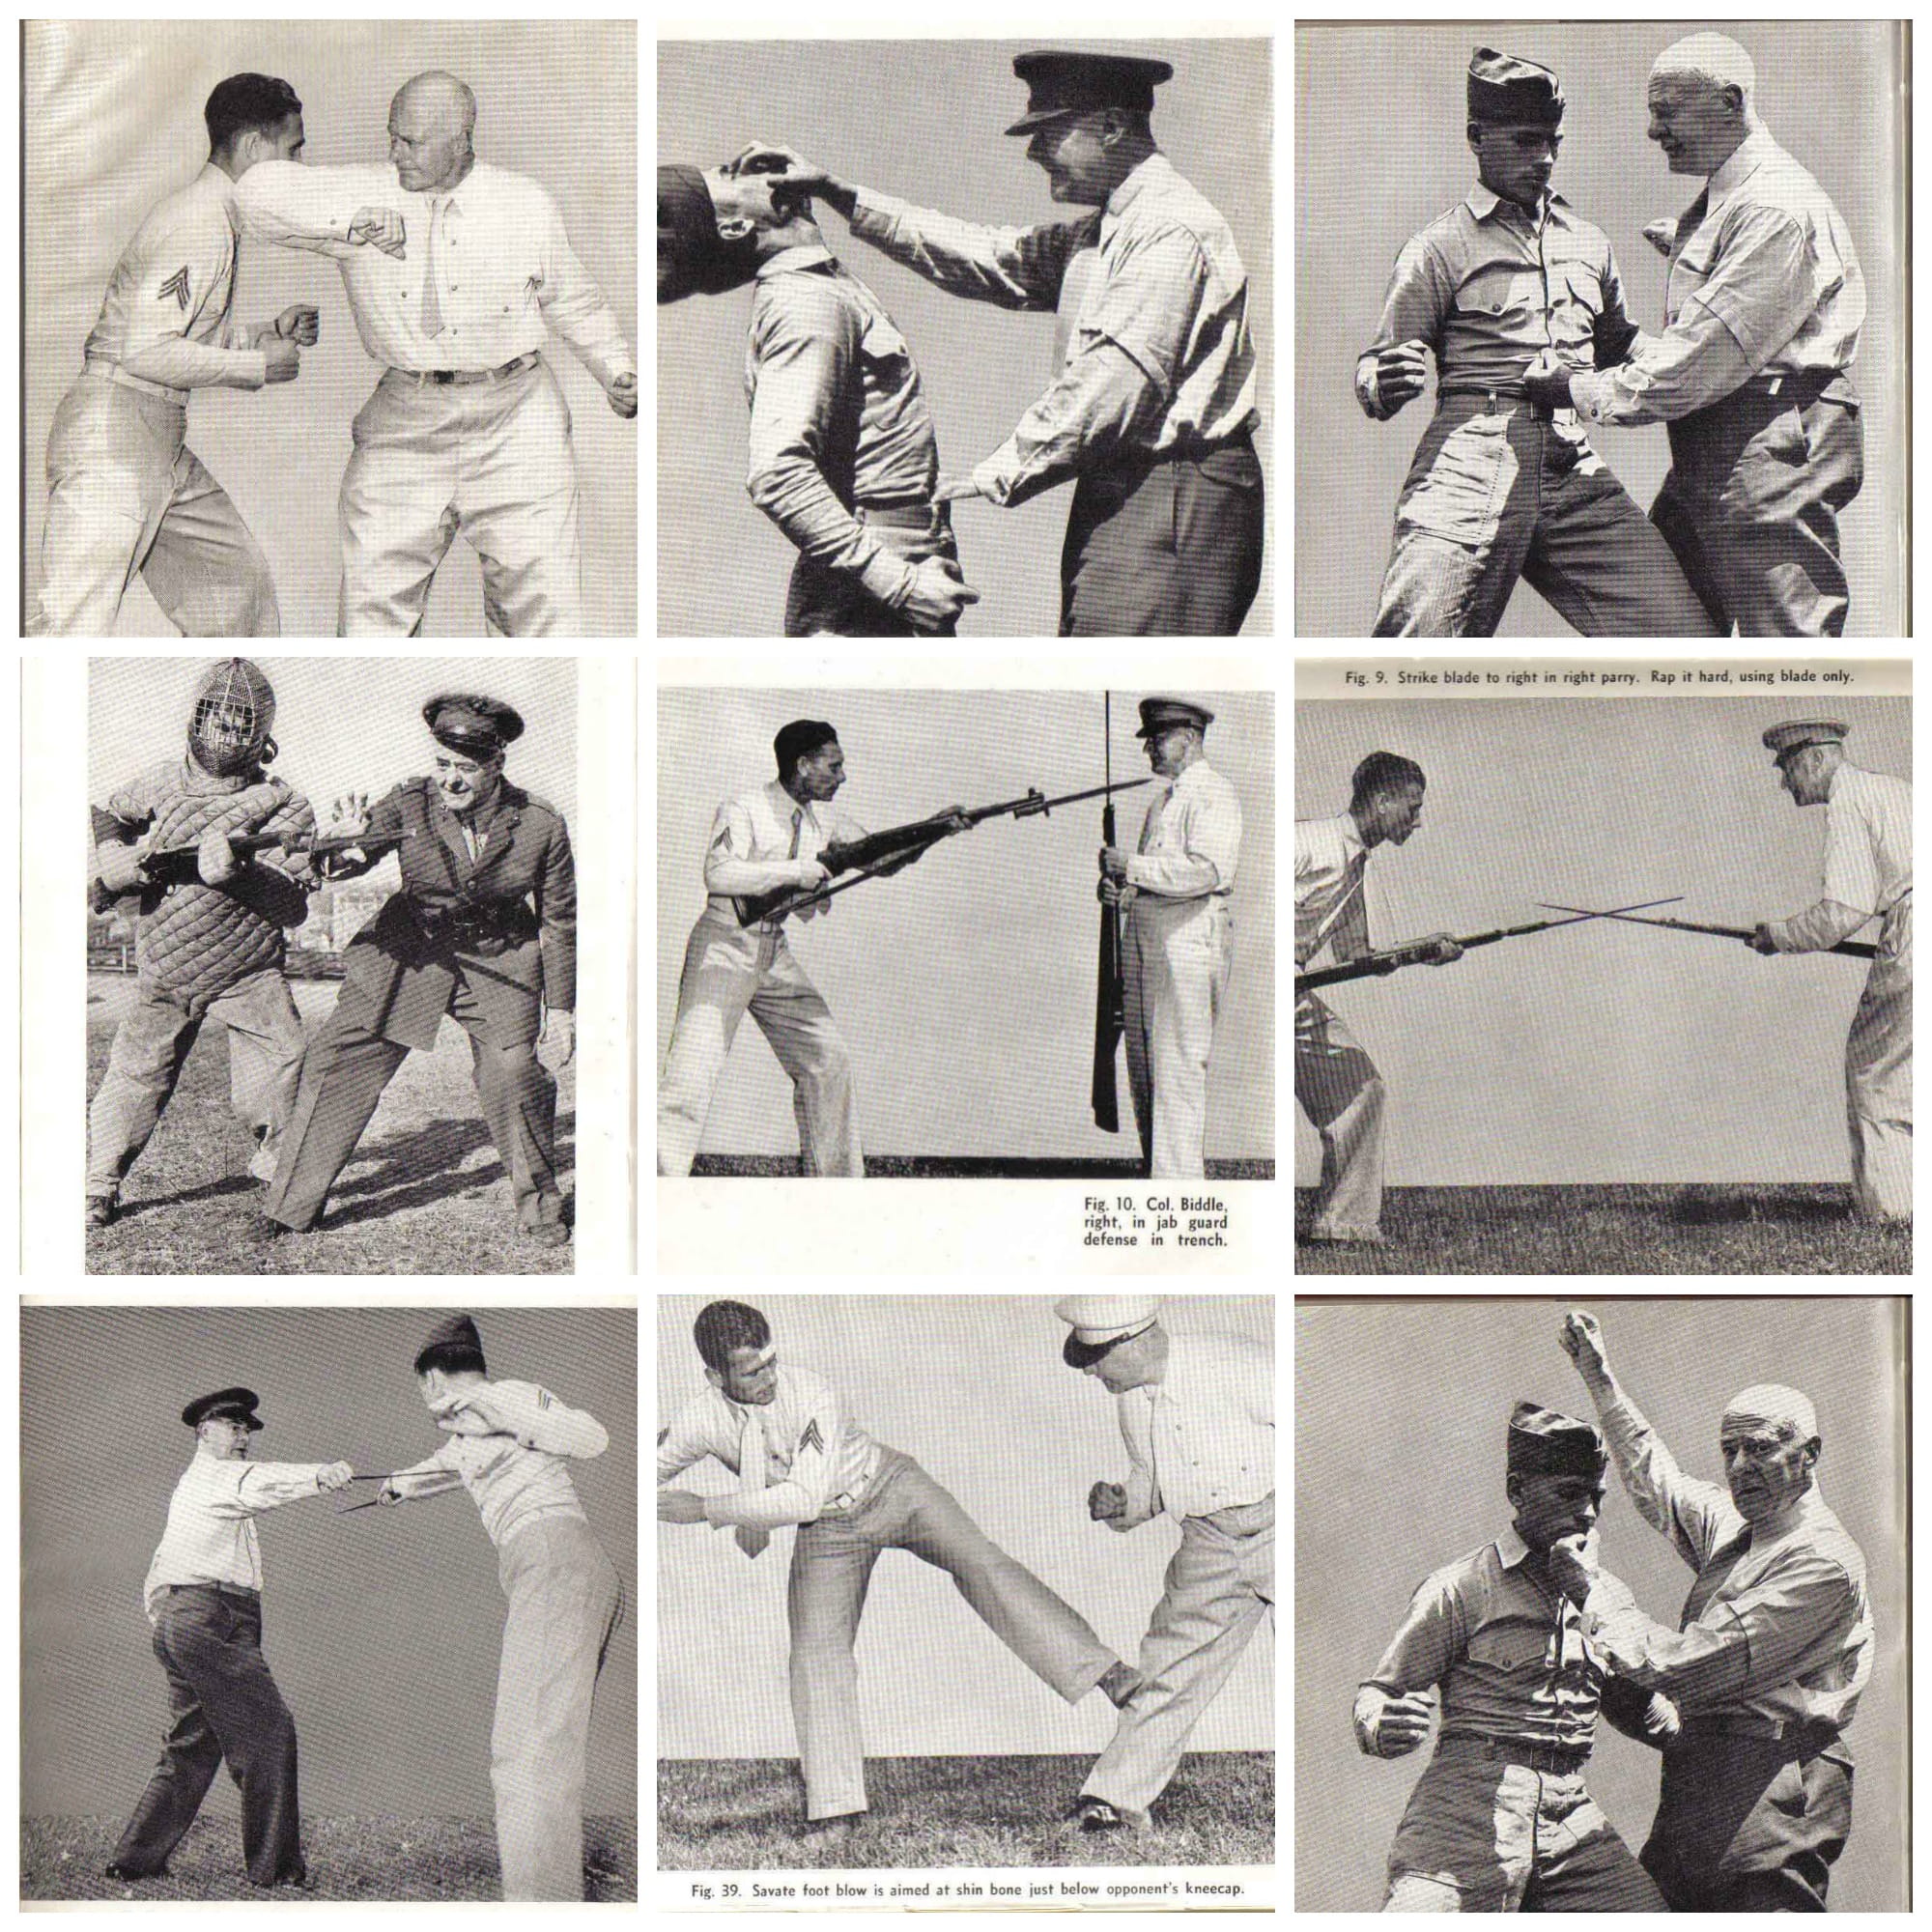 Biddle demonstrates his “Biddle Method of Close-Combat” in these photos from “Do or Die.”